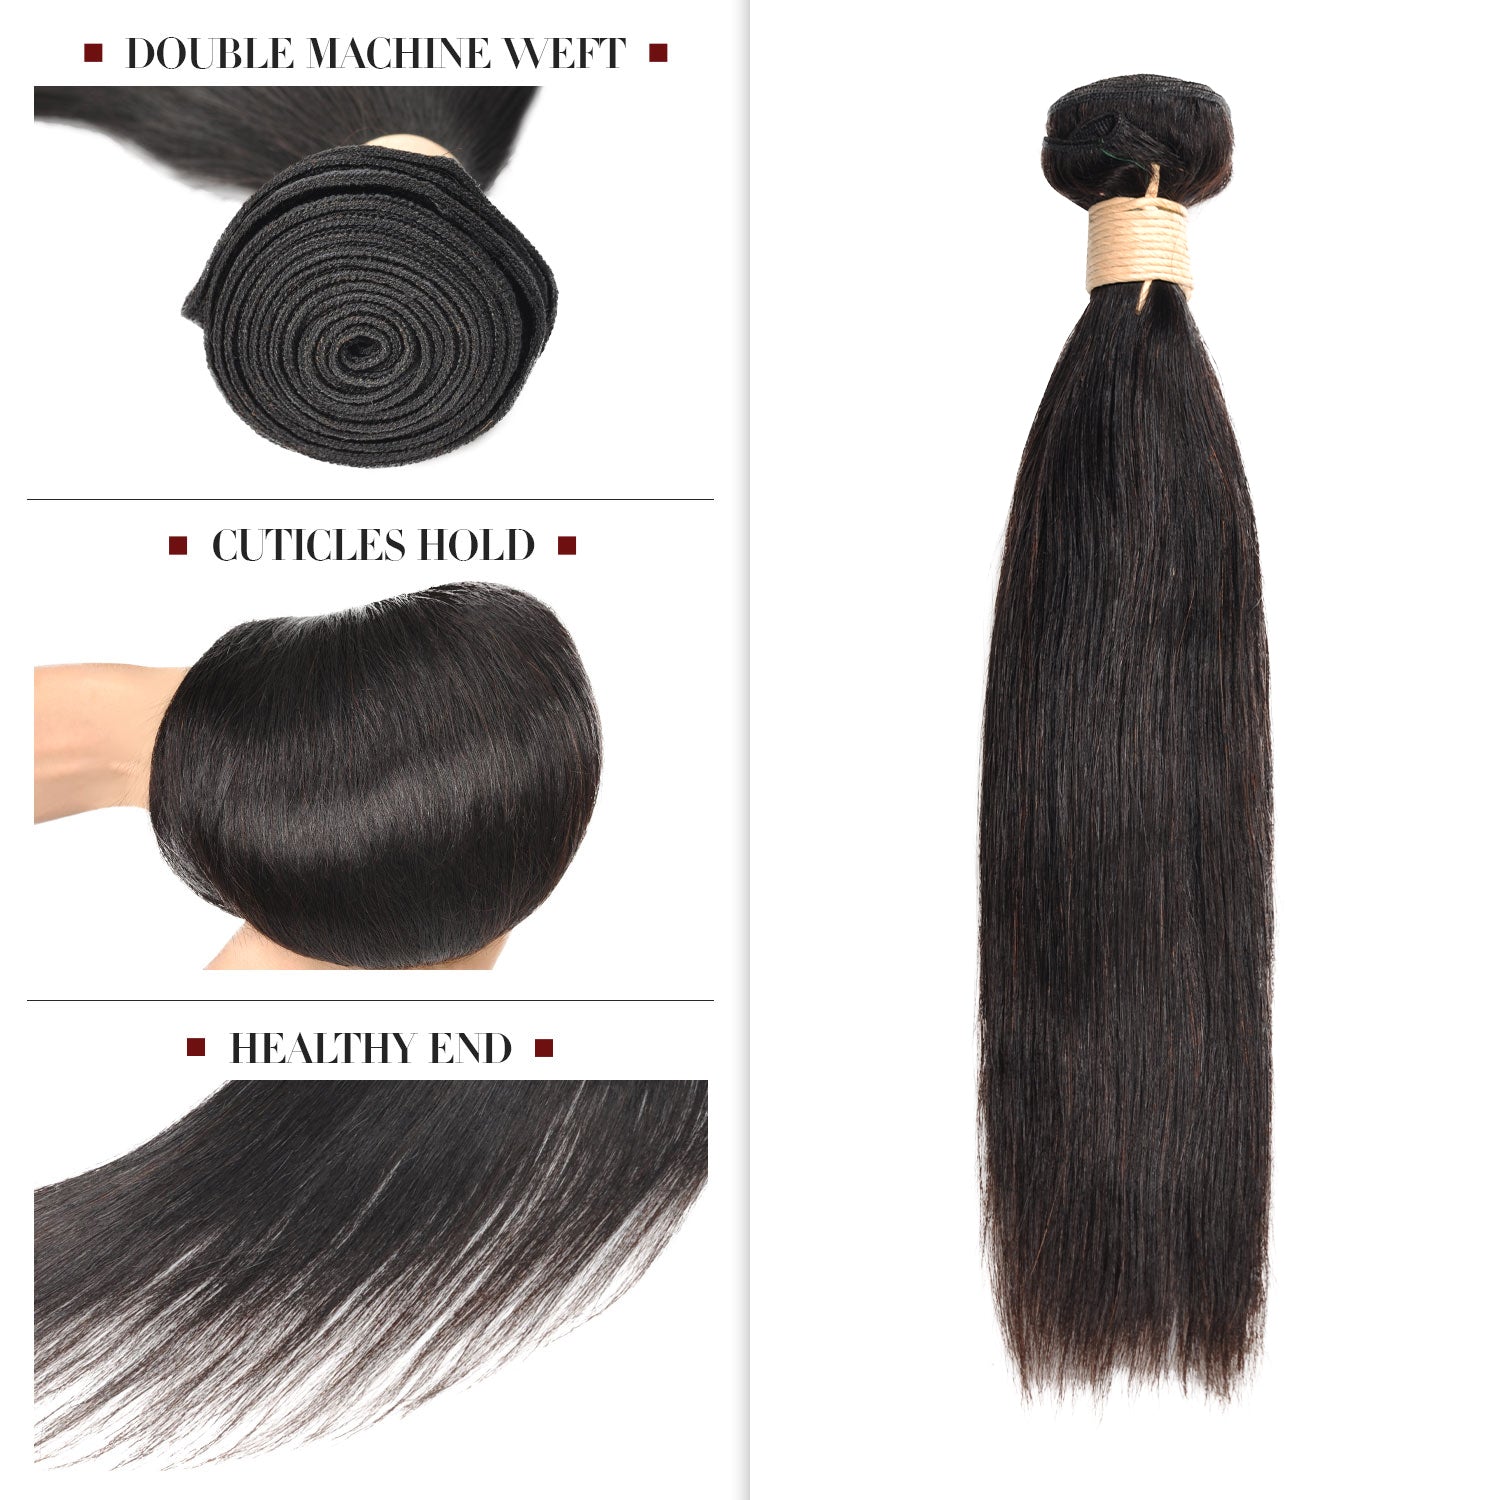 100% Virgin Remy Human Hair Unprocessed Brazilian Weave Natural Straight